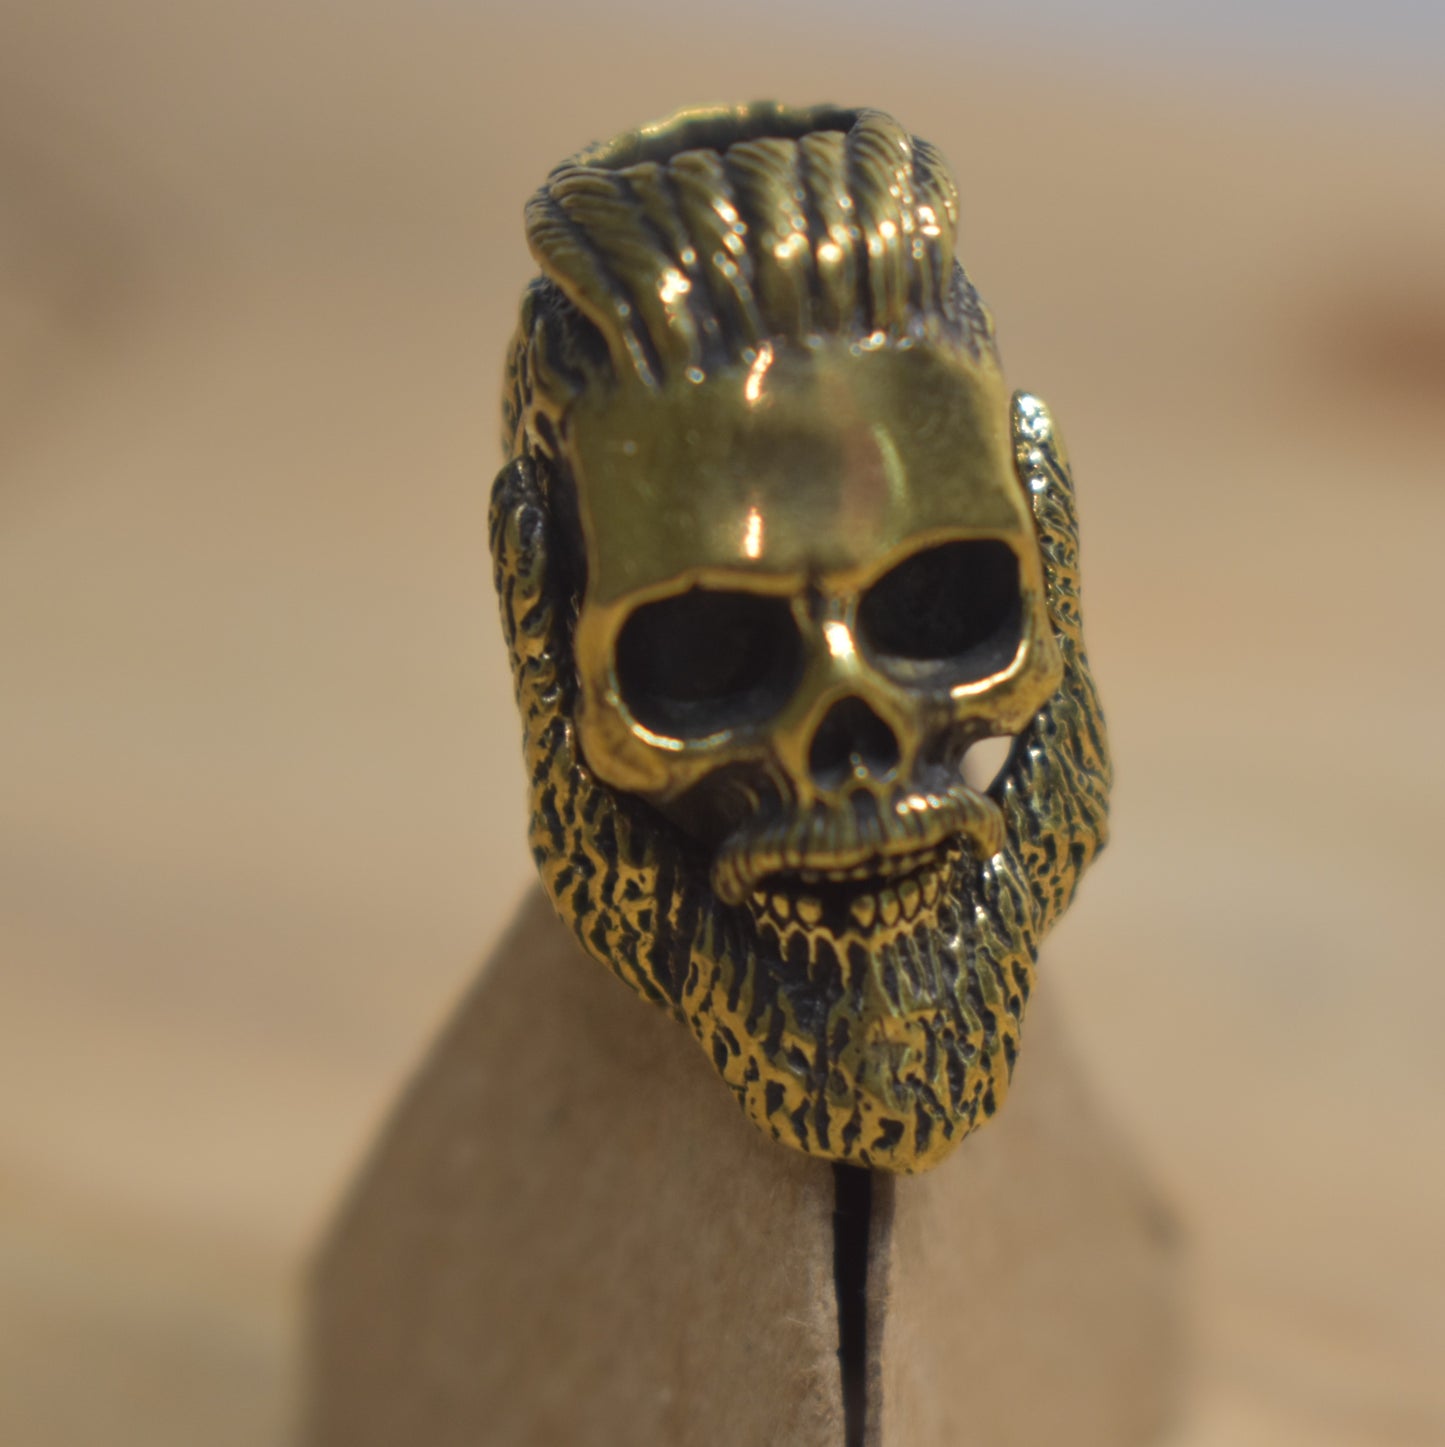 Skull with Beard and Ponytail Bead